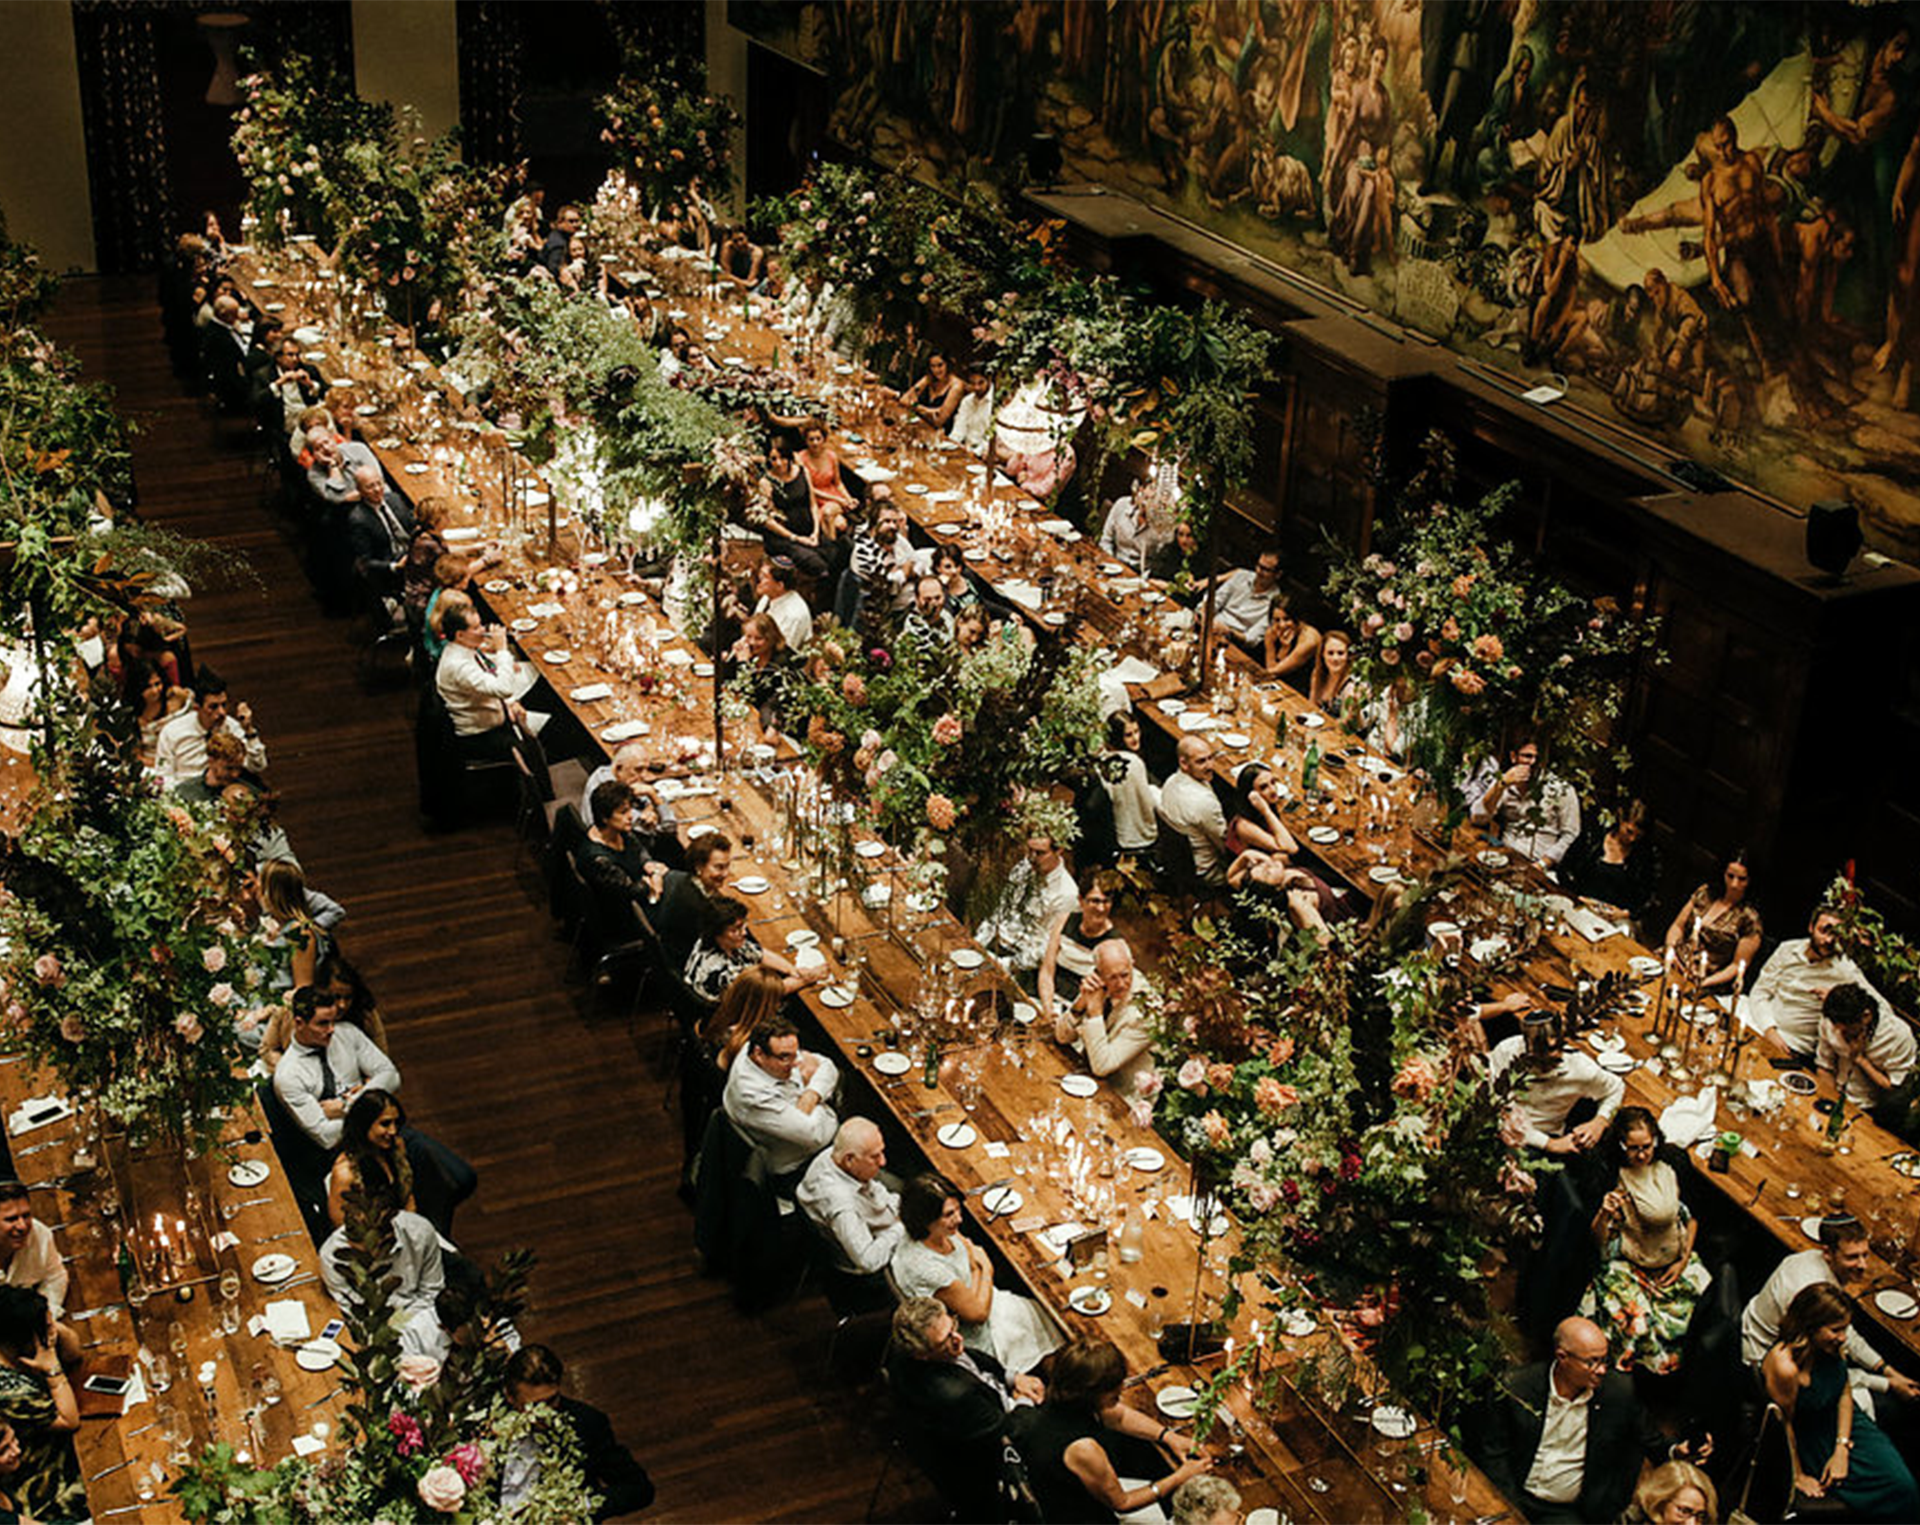 Gala dinner in a big dining hall room